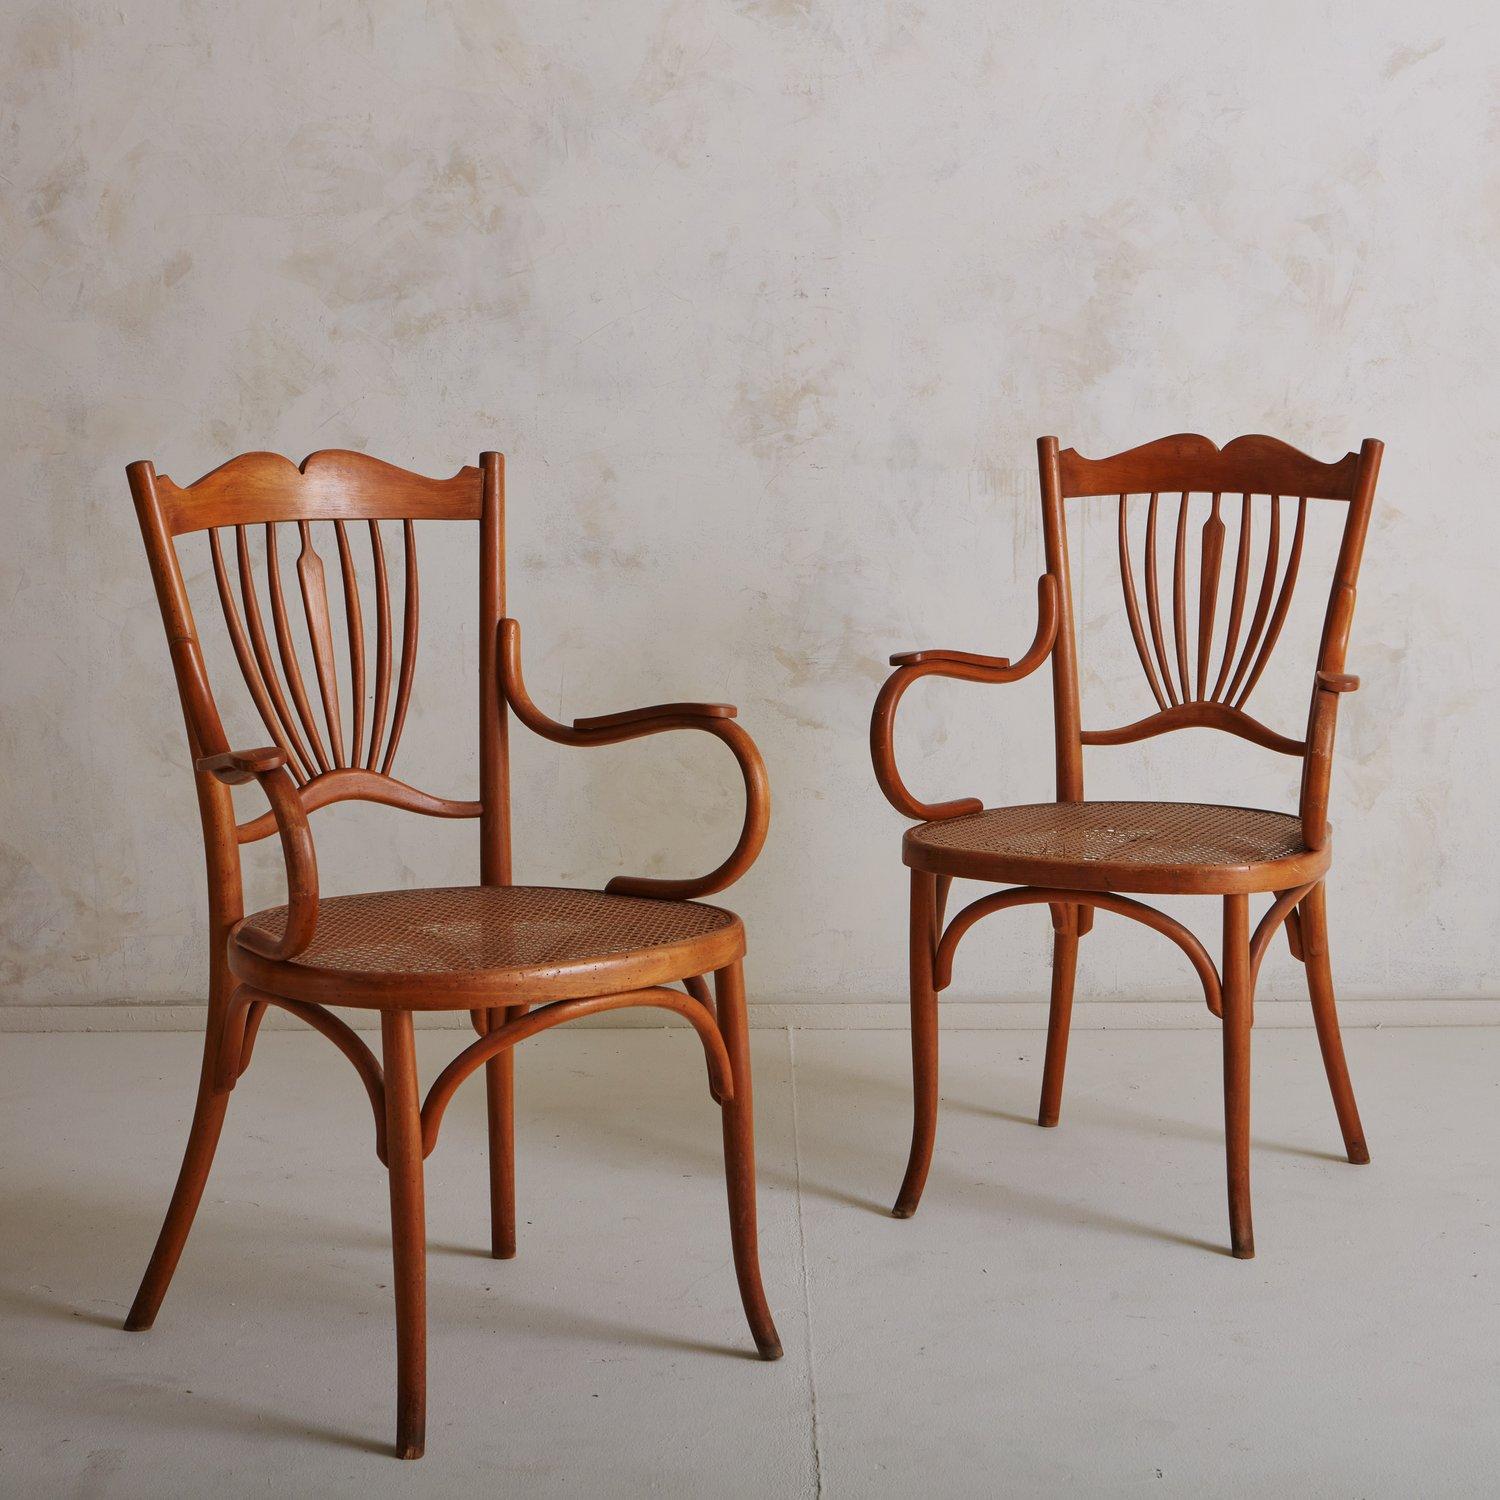 French Pair of Art Nouveau Caned Chairs Attributed to Fischel, France, 1900s